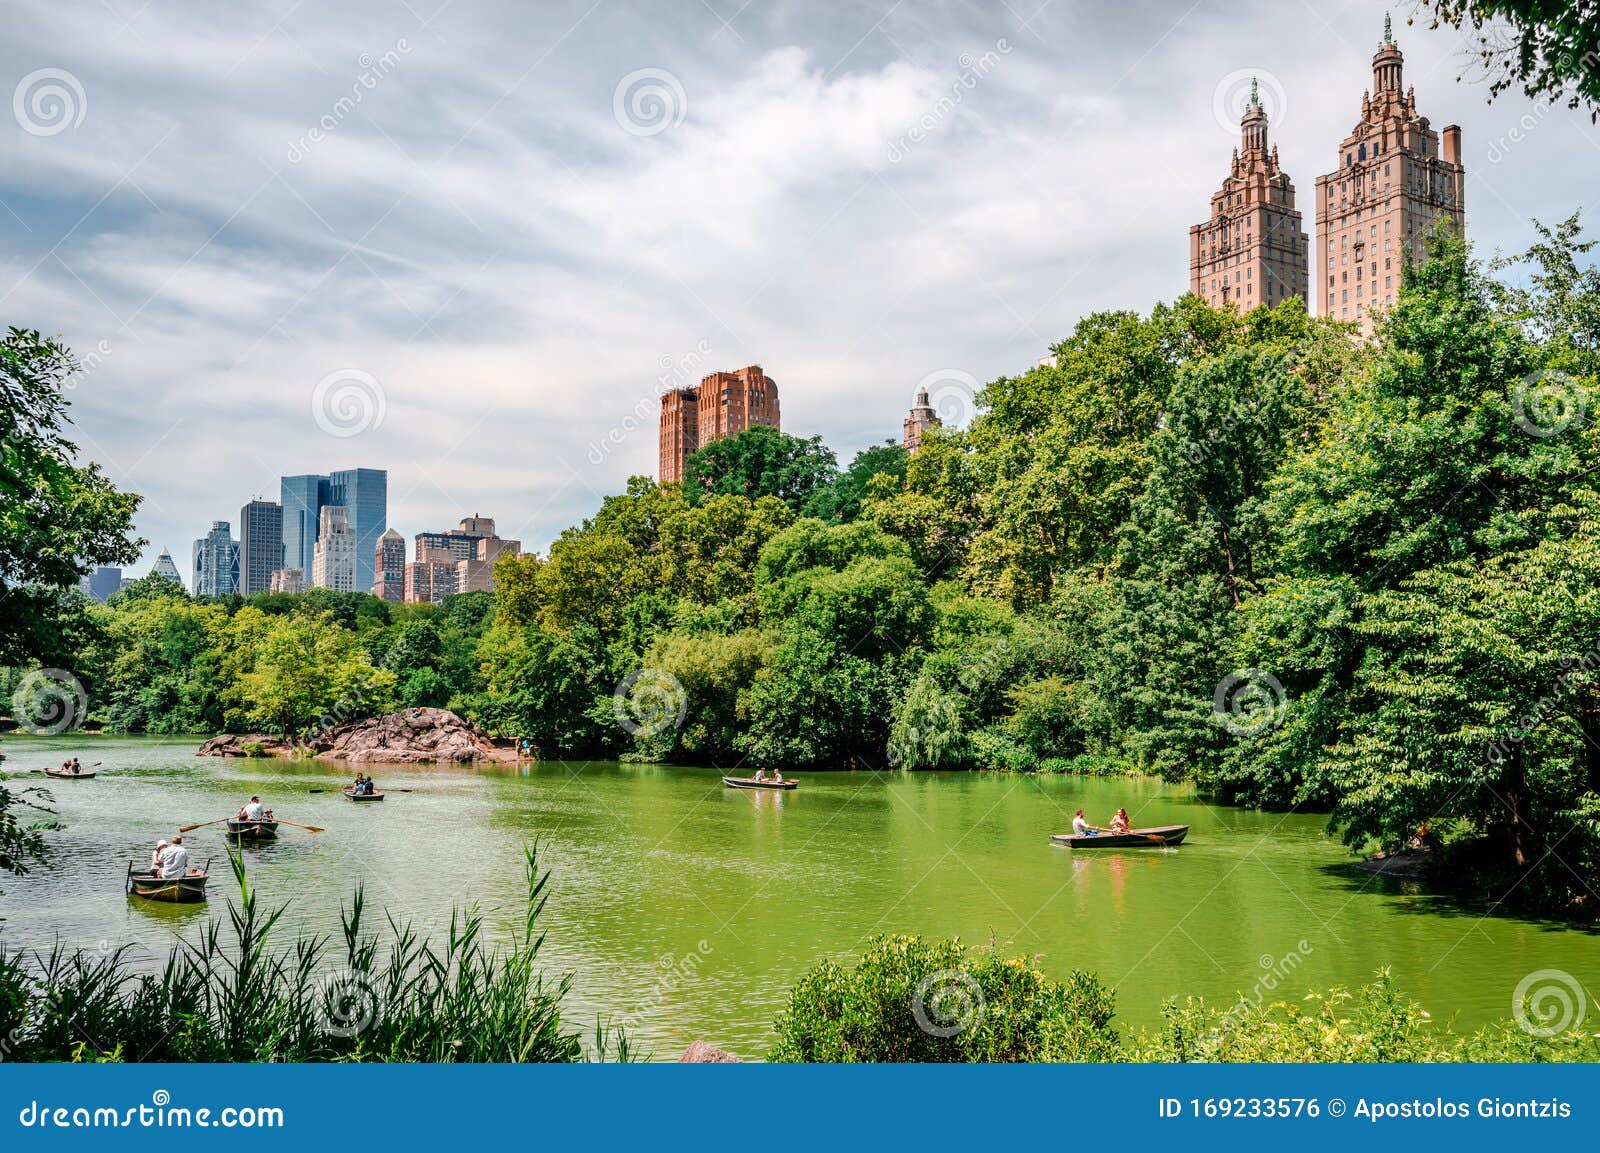 Rowing In The Lake In The Central Park. Editorial Photo - Image of ...